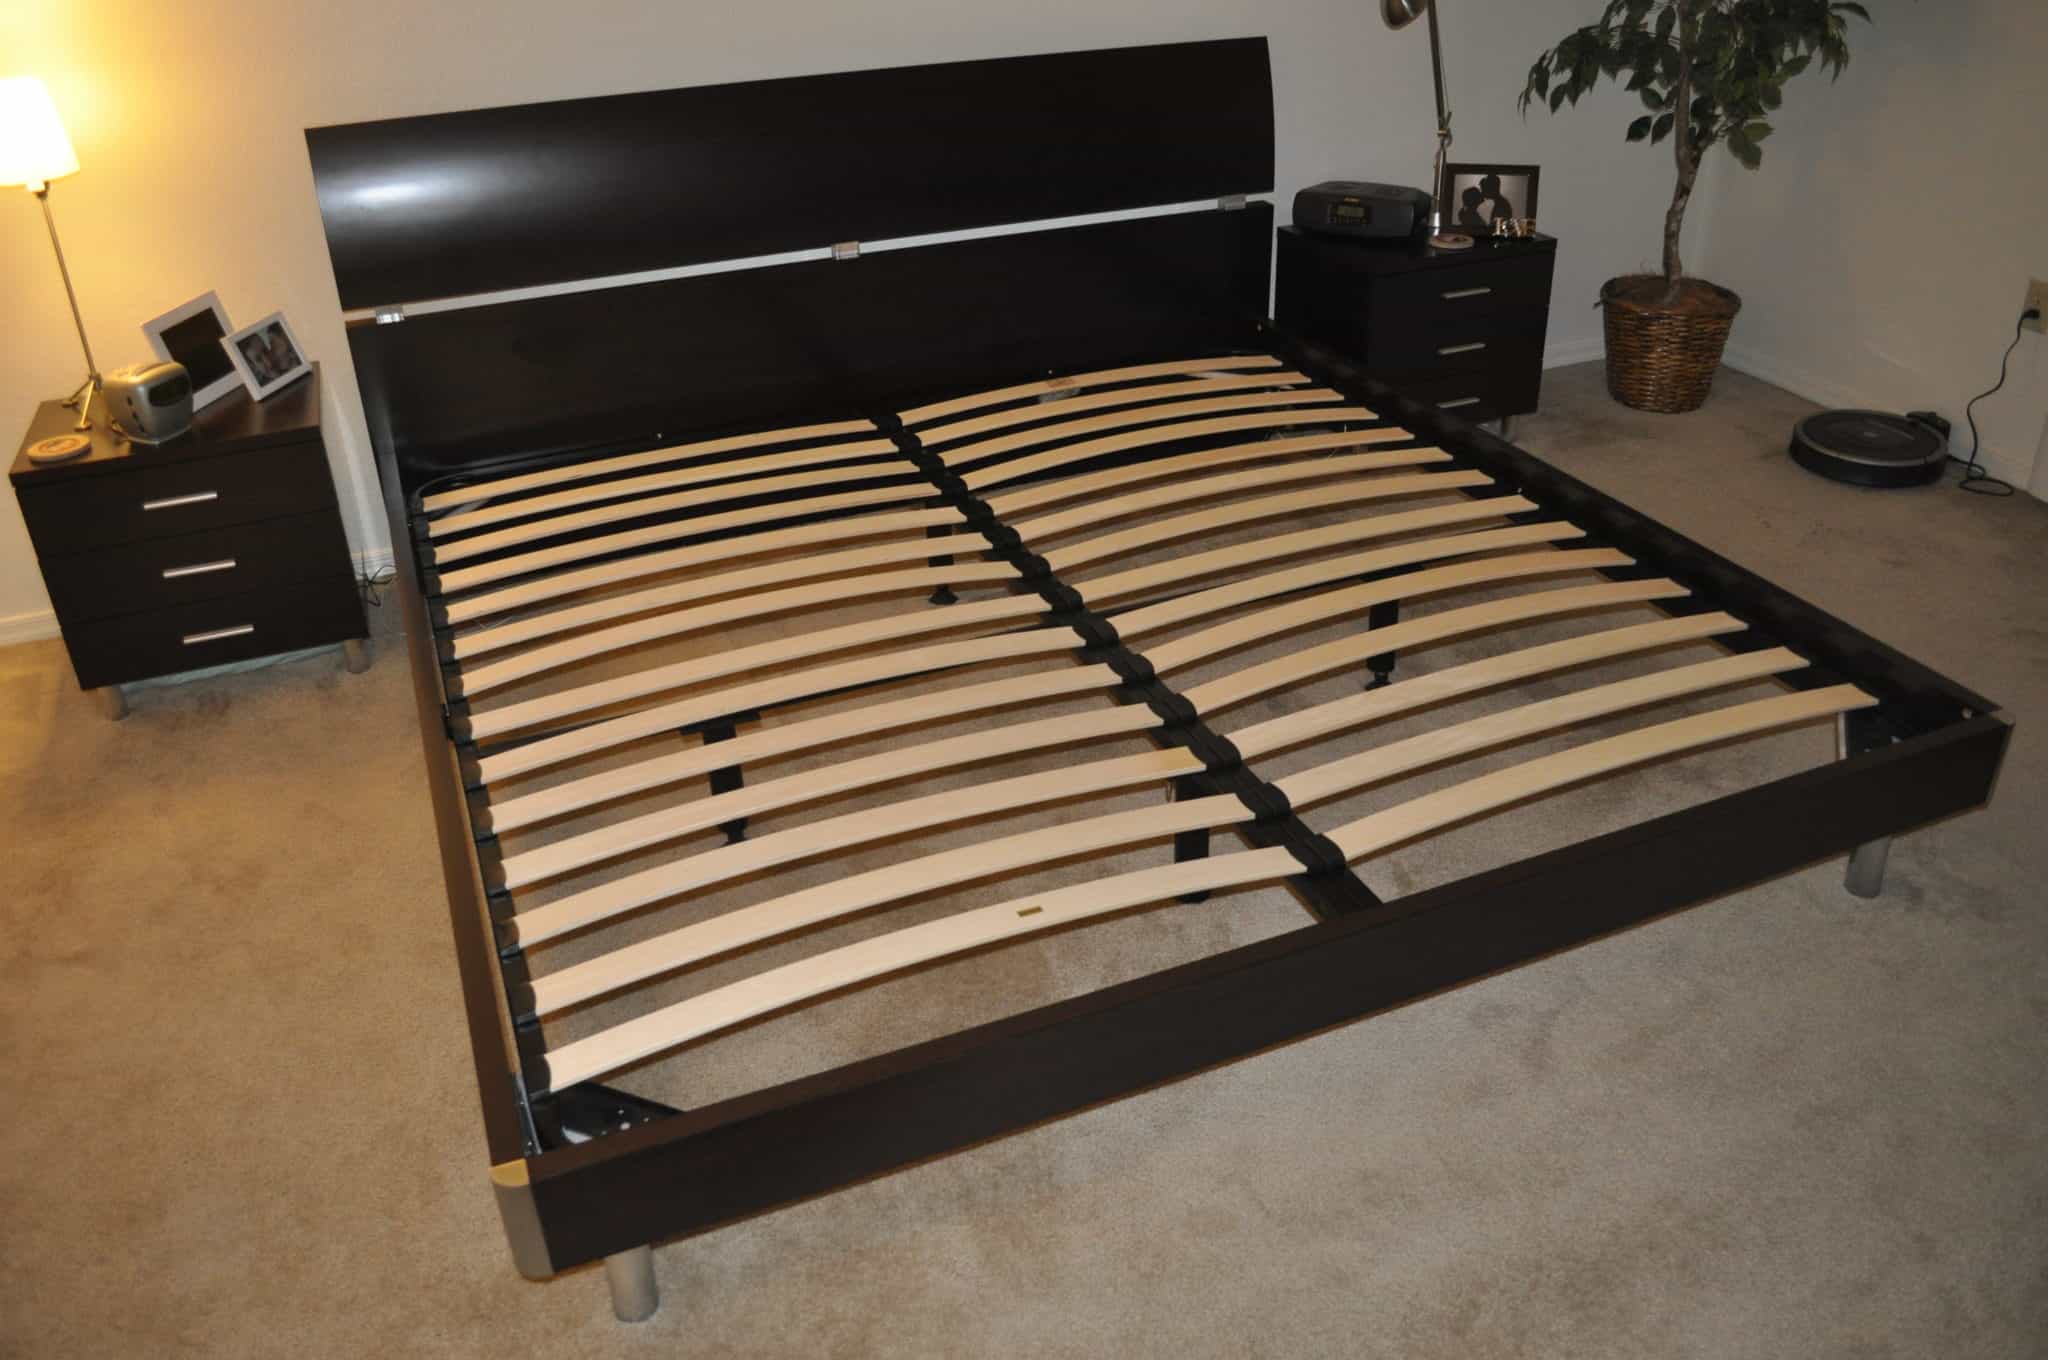 Bunkie Boards Box Springs And Bed, How To Make Bunkie Boards For Bunk Beds